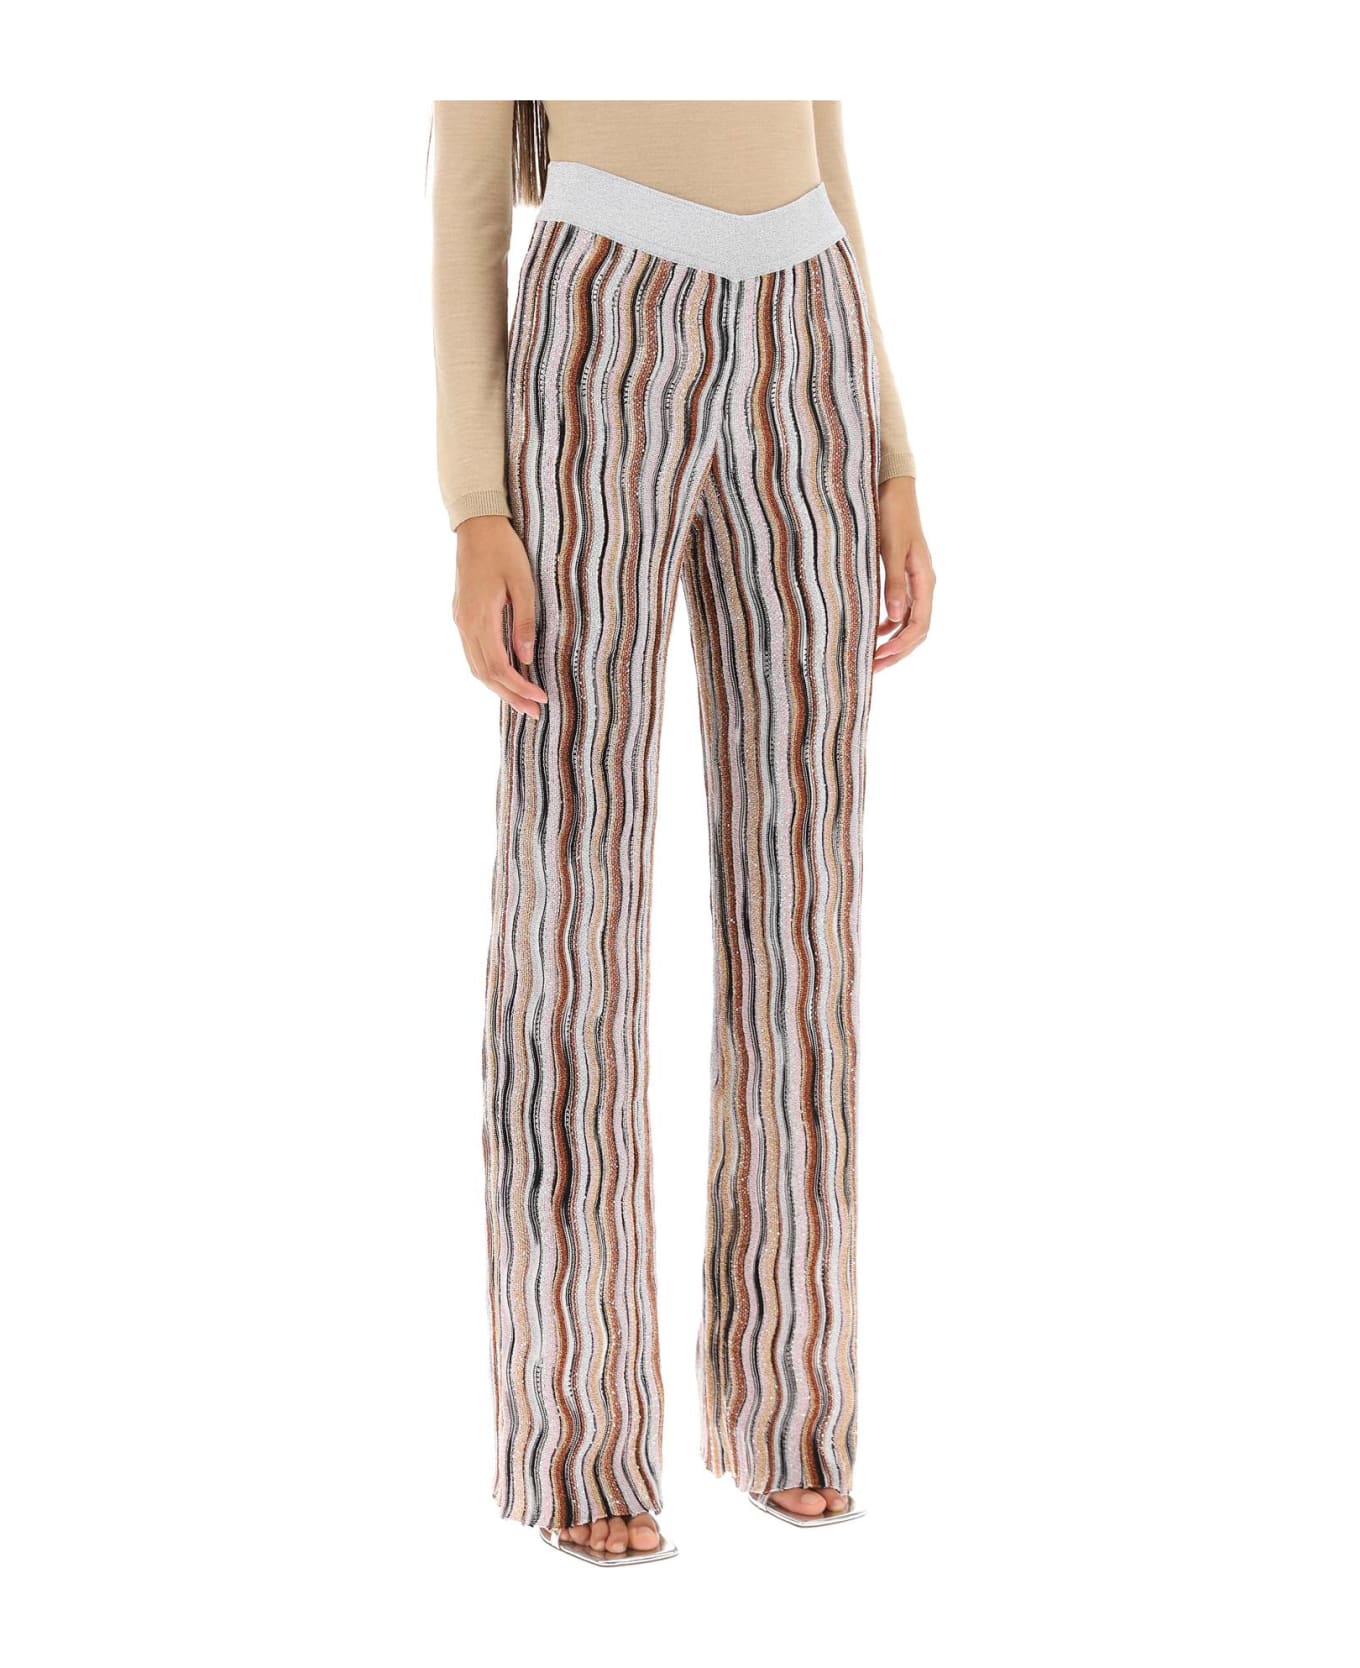 Missoni Sequined Knit Pants With Wavy Motif - MULTI PAILL ORANG RE (Metallic)